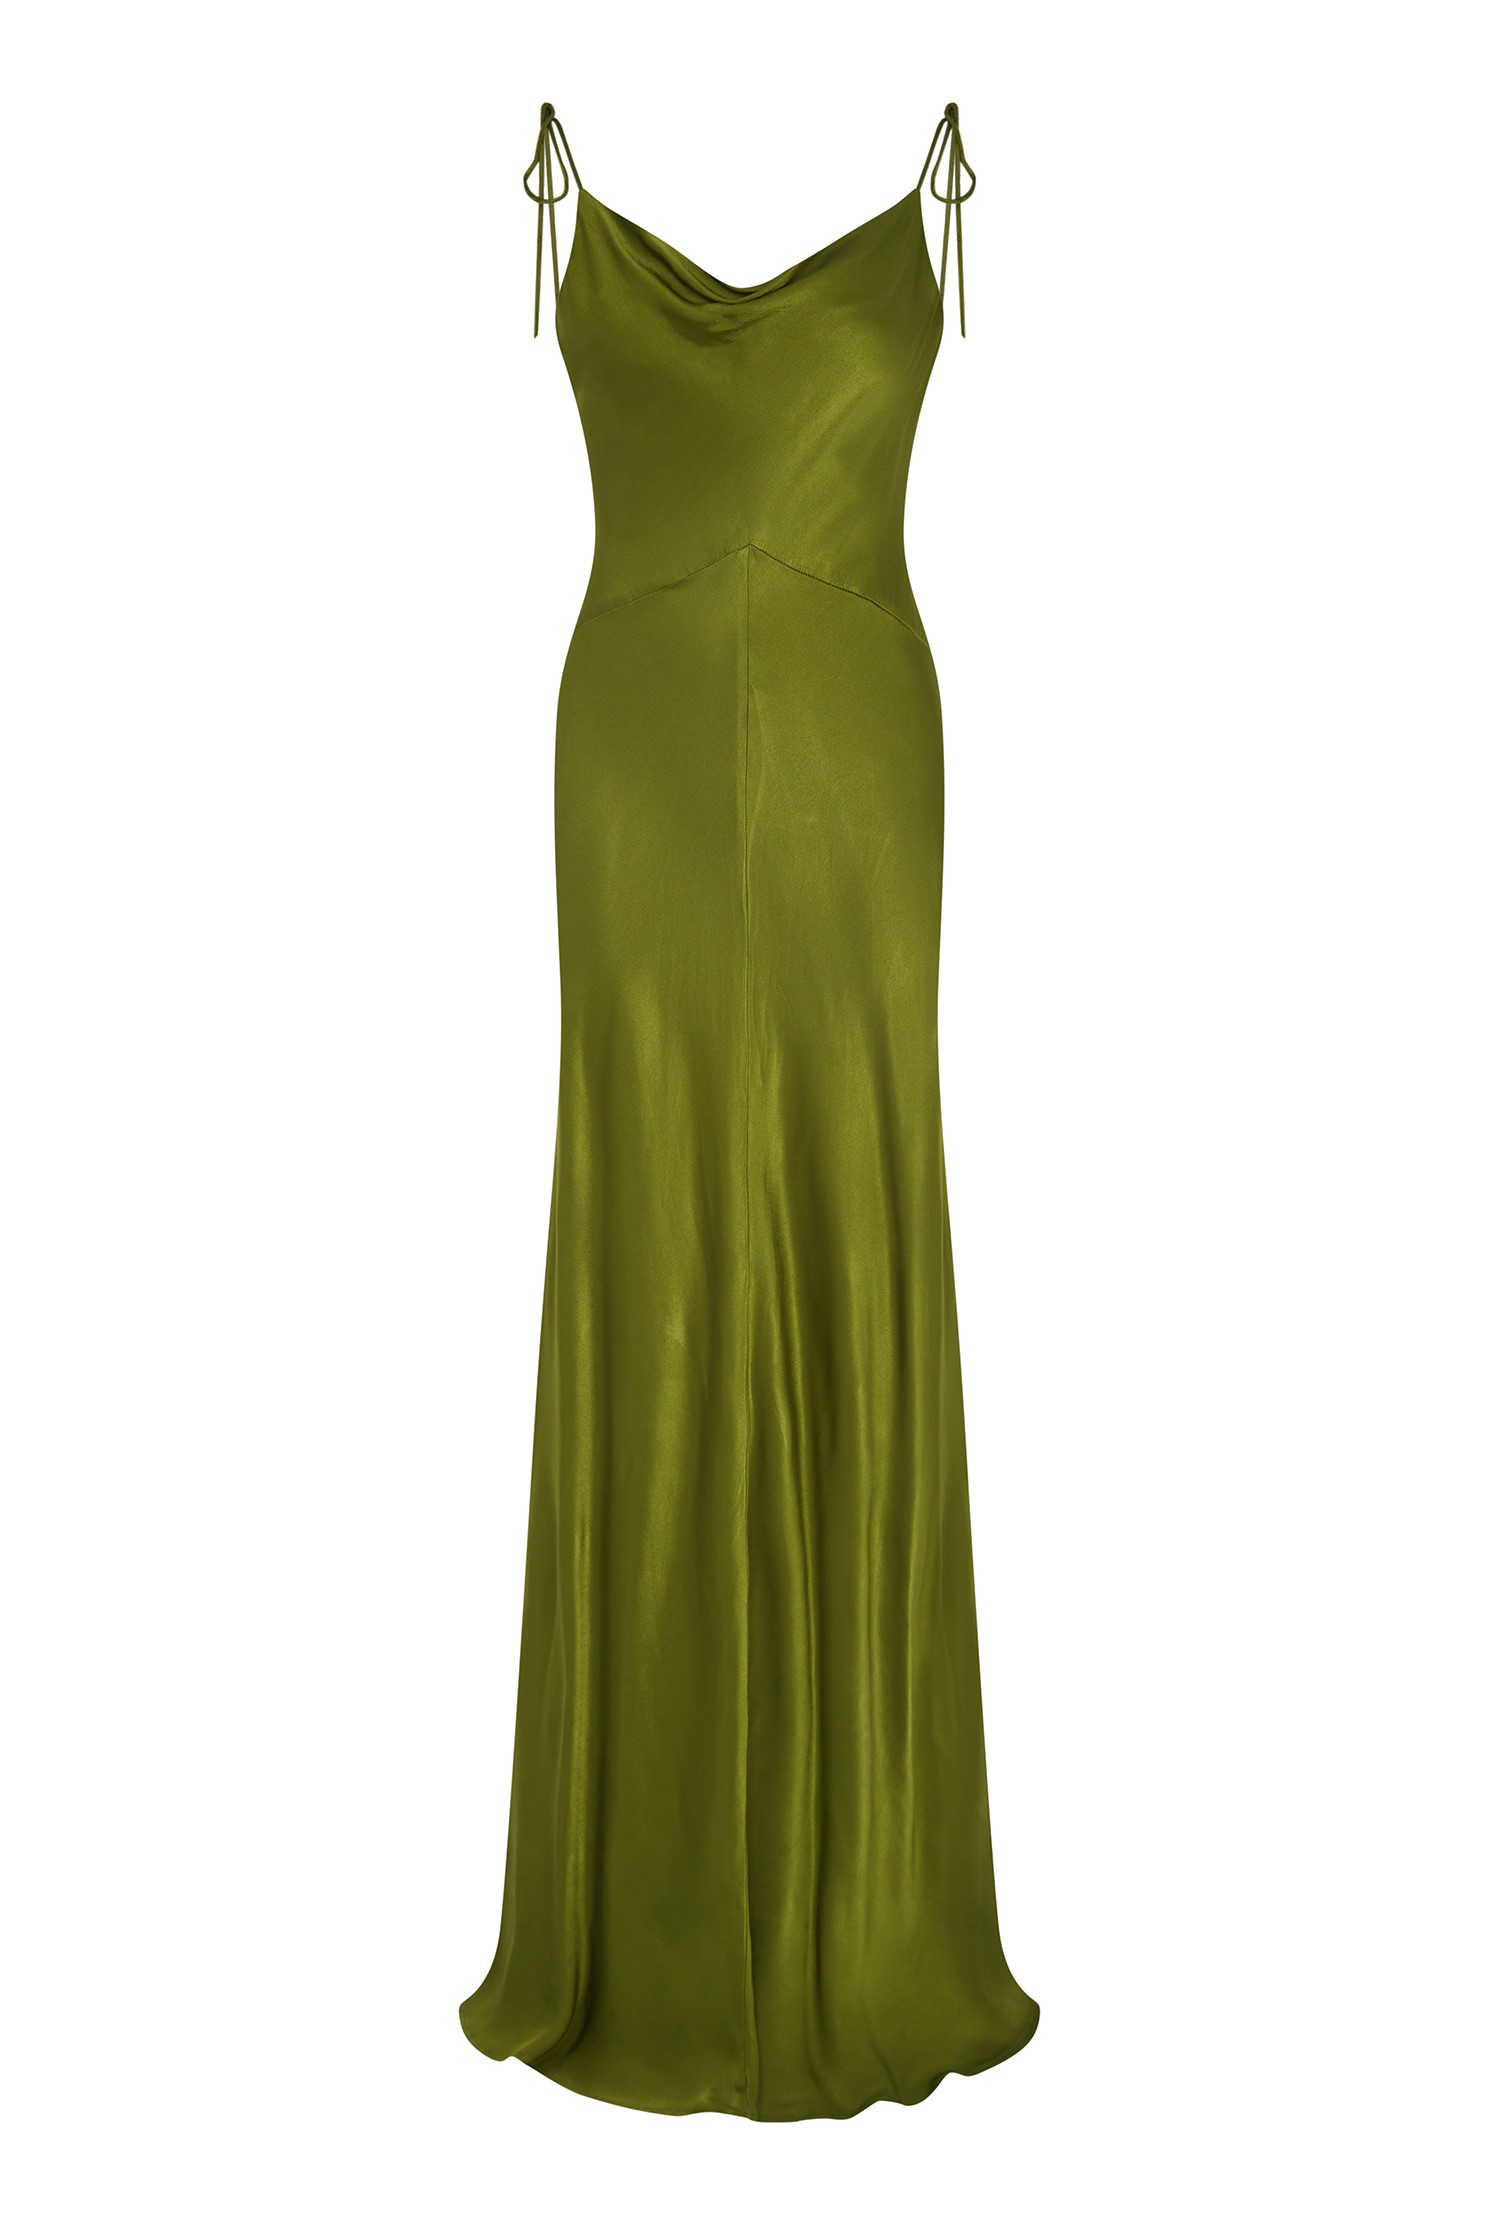 Long Occ Dress With Sleeveless Sleeves In Green With A Soft Cowl ...